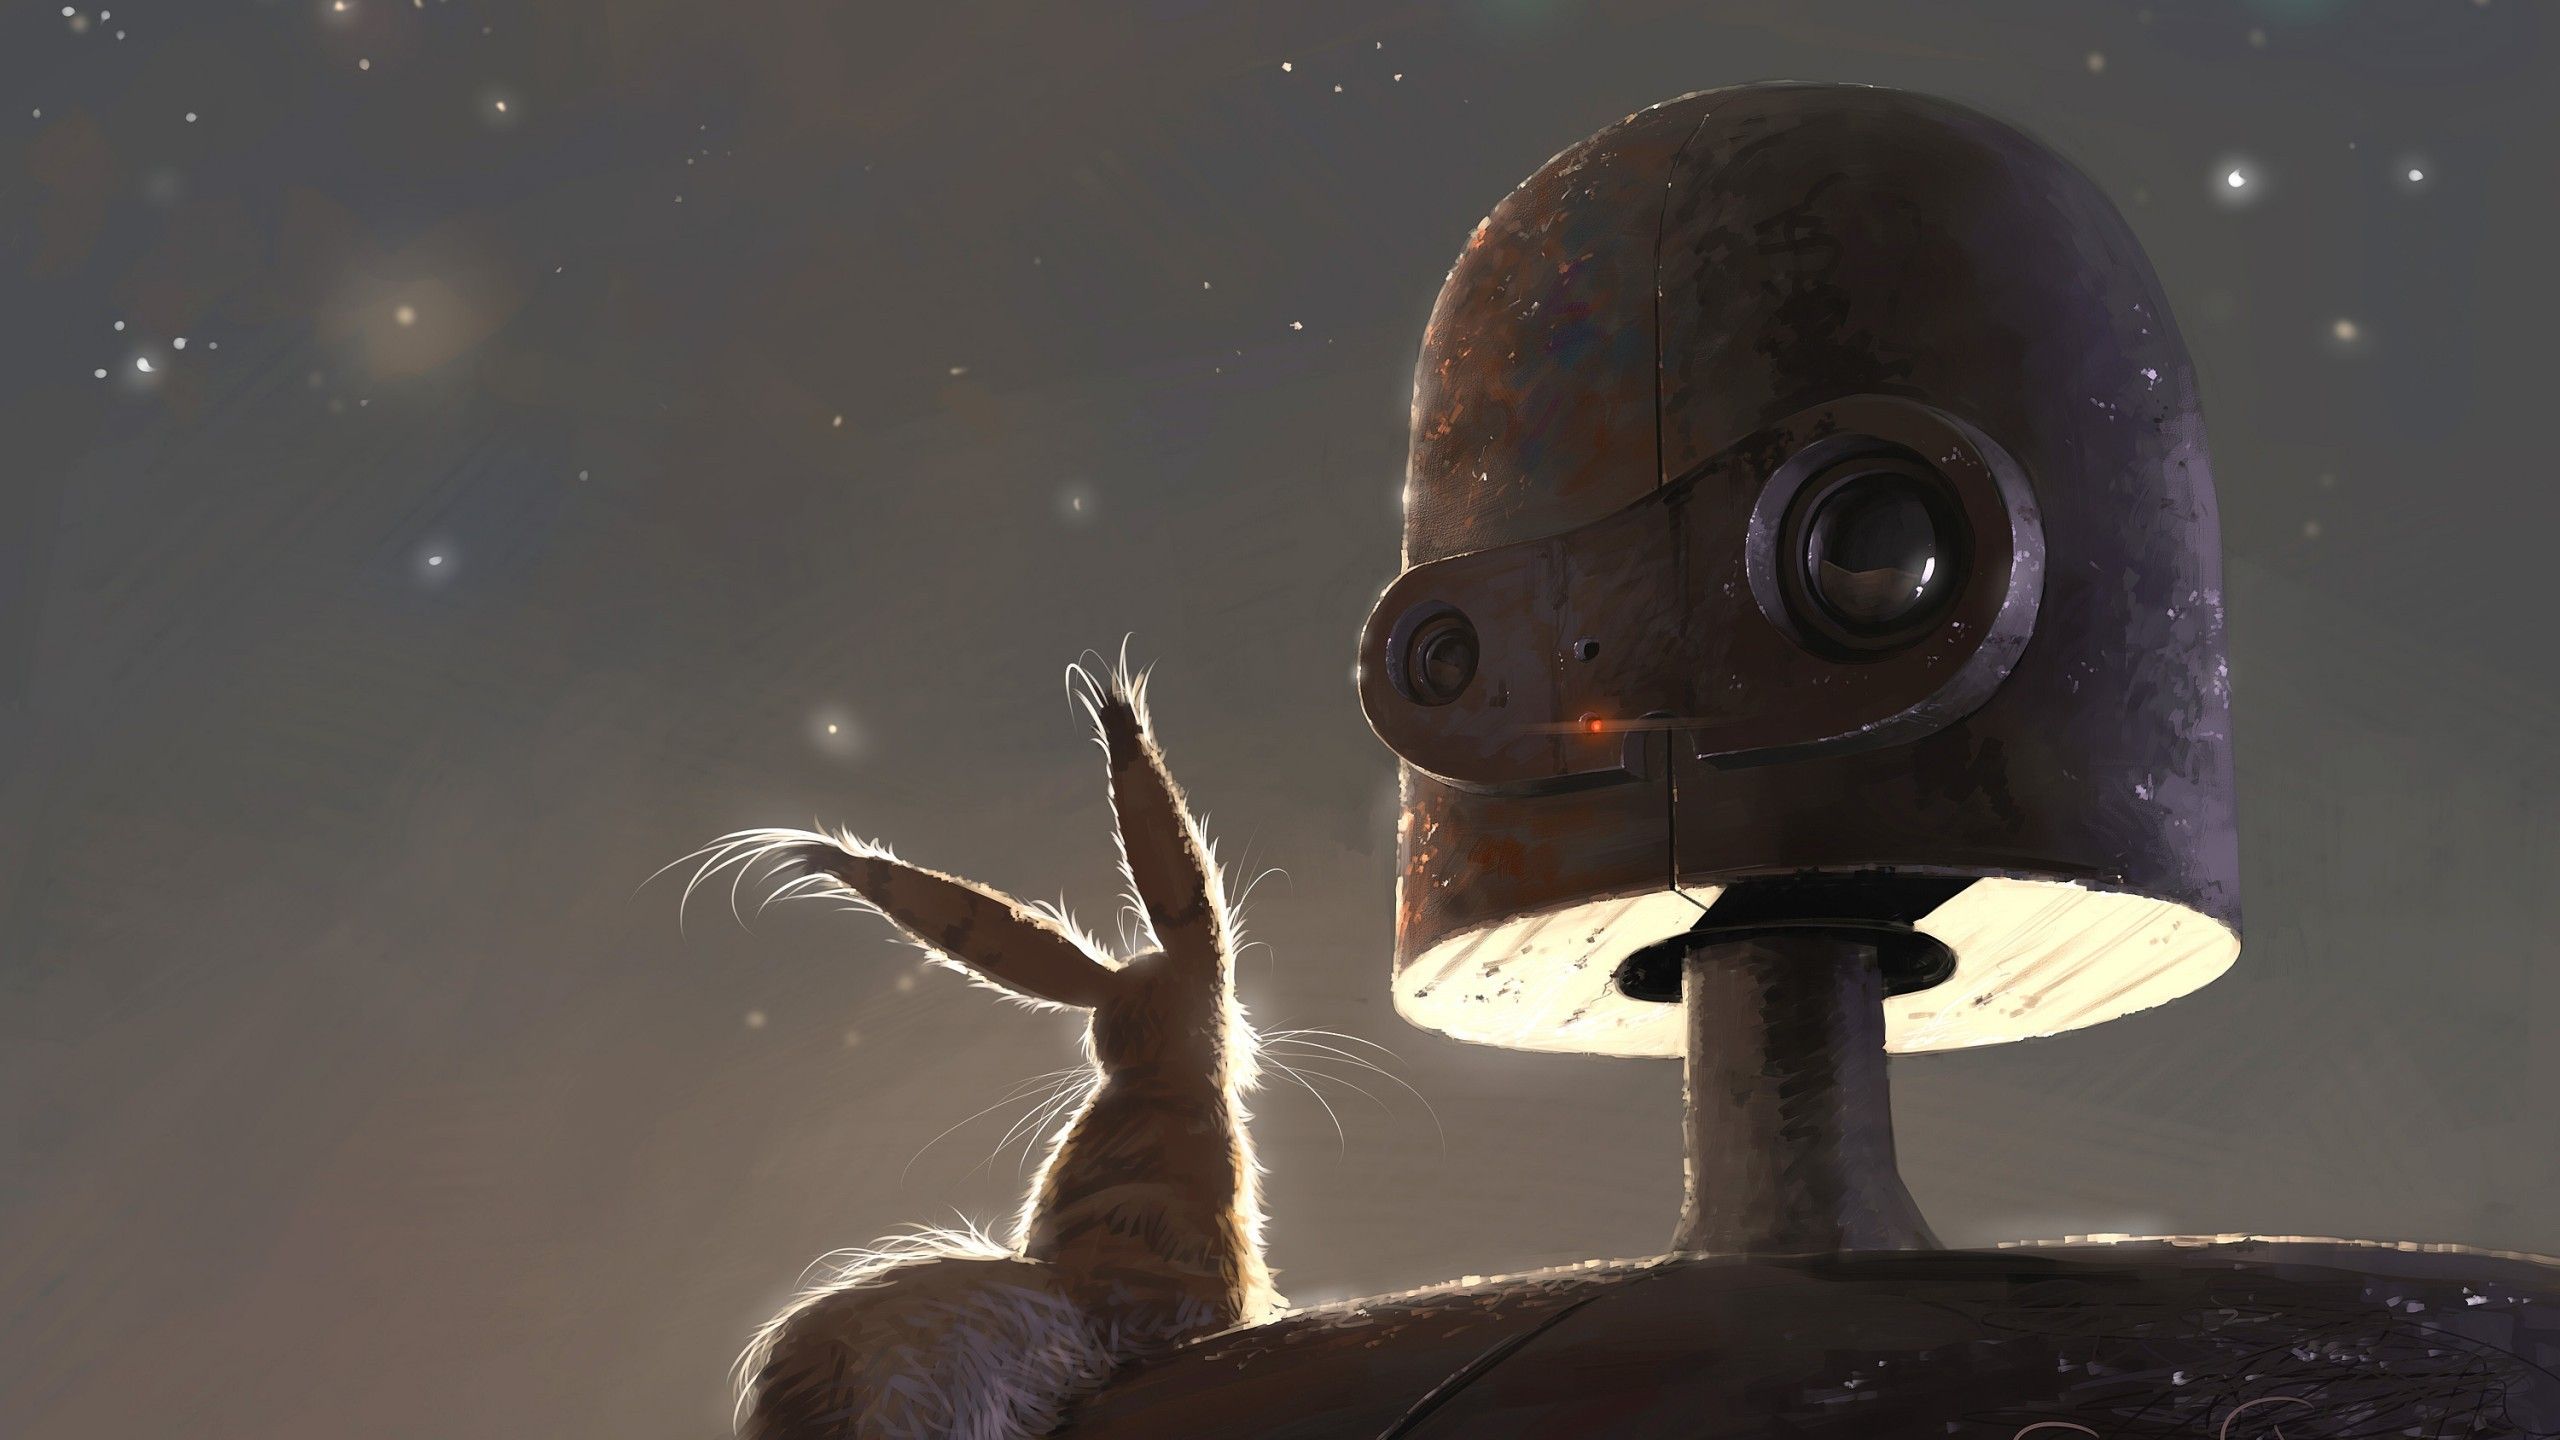 Wallpaper, anime, robot, reflection, vehicle, artwork, sculpture, Studio Ghibli, Castle in the Sky, ART, light, darkness, screenshot, computer wallpaper, atmosphere of earth, outer space, astronomical object 2560x1440 Wallpaper